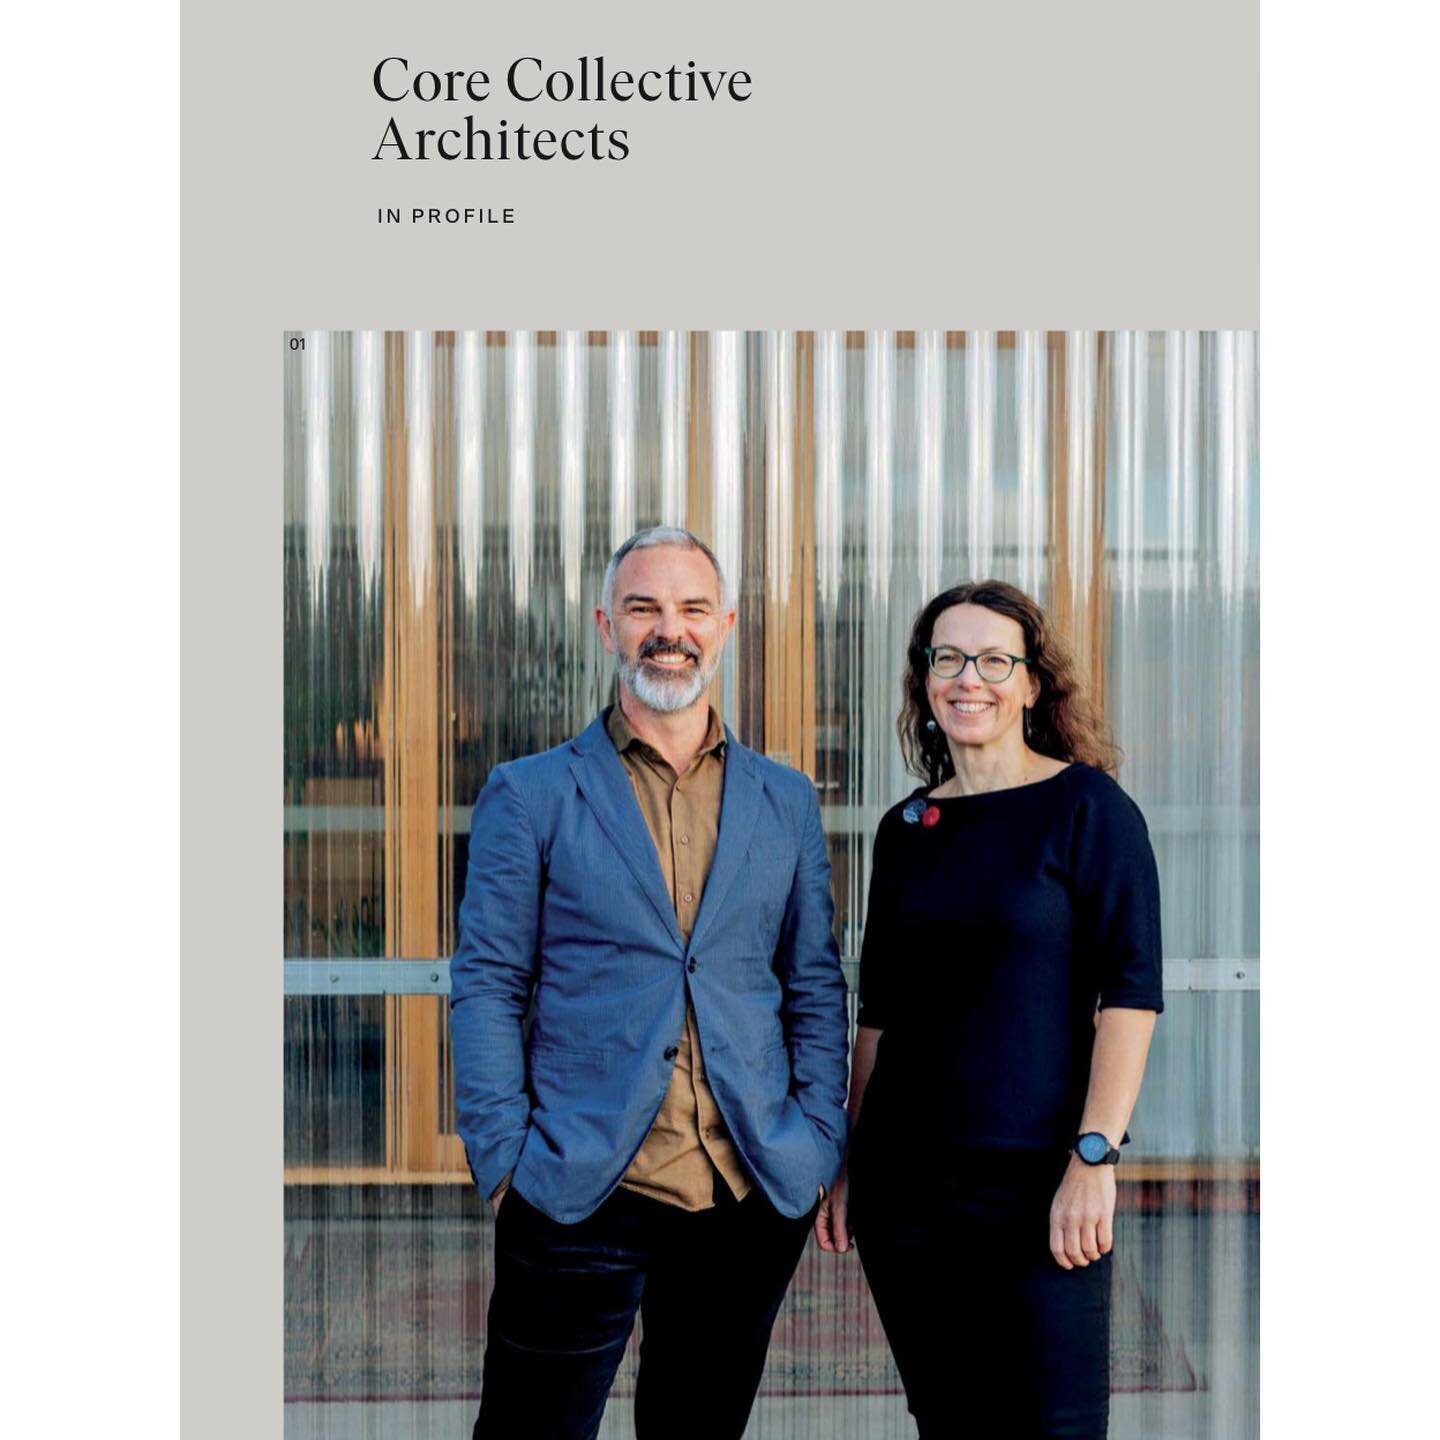 No Core Collective - Get to know one of the core aesthetics that